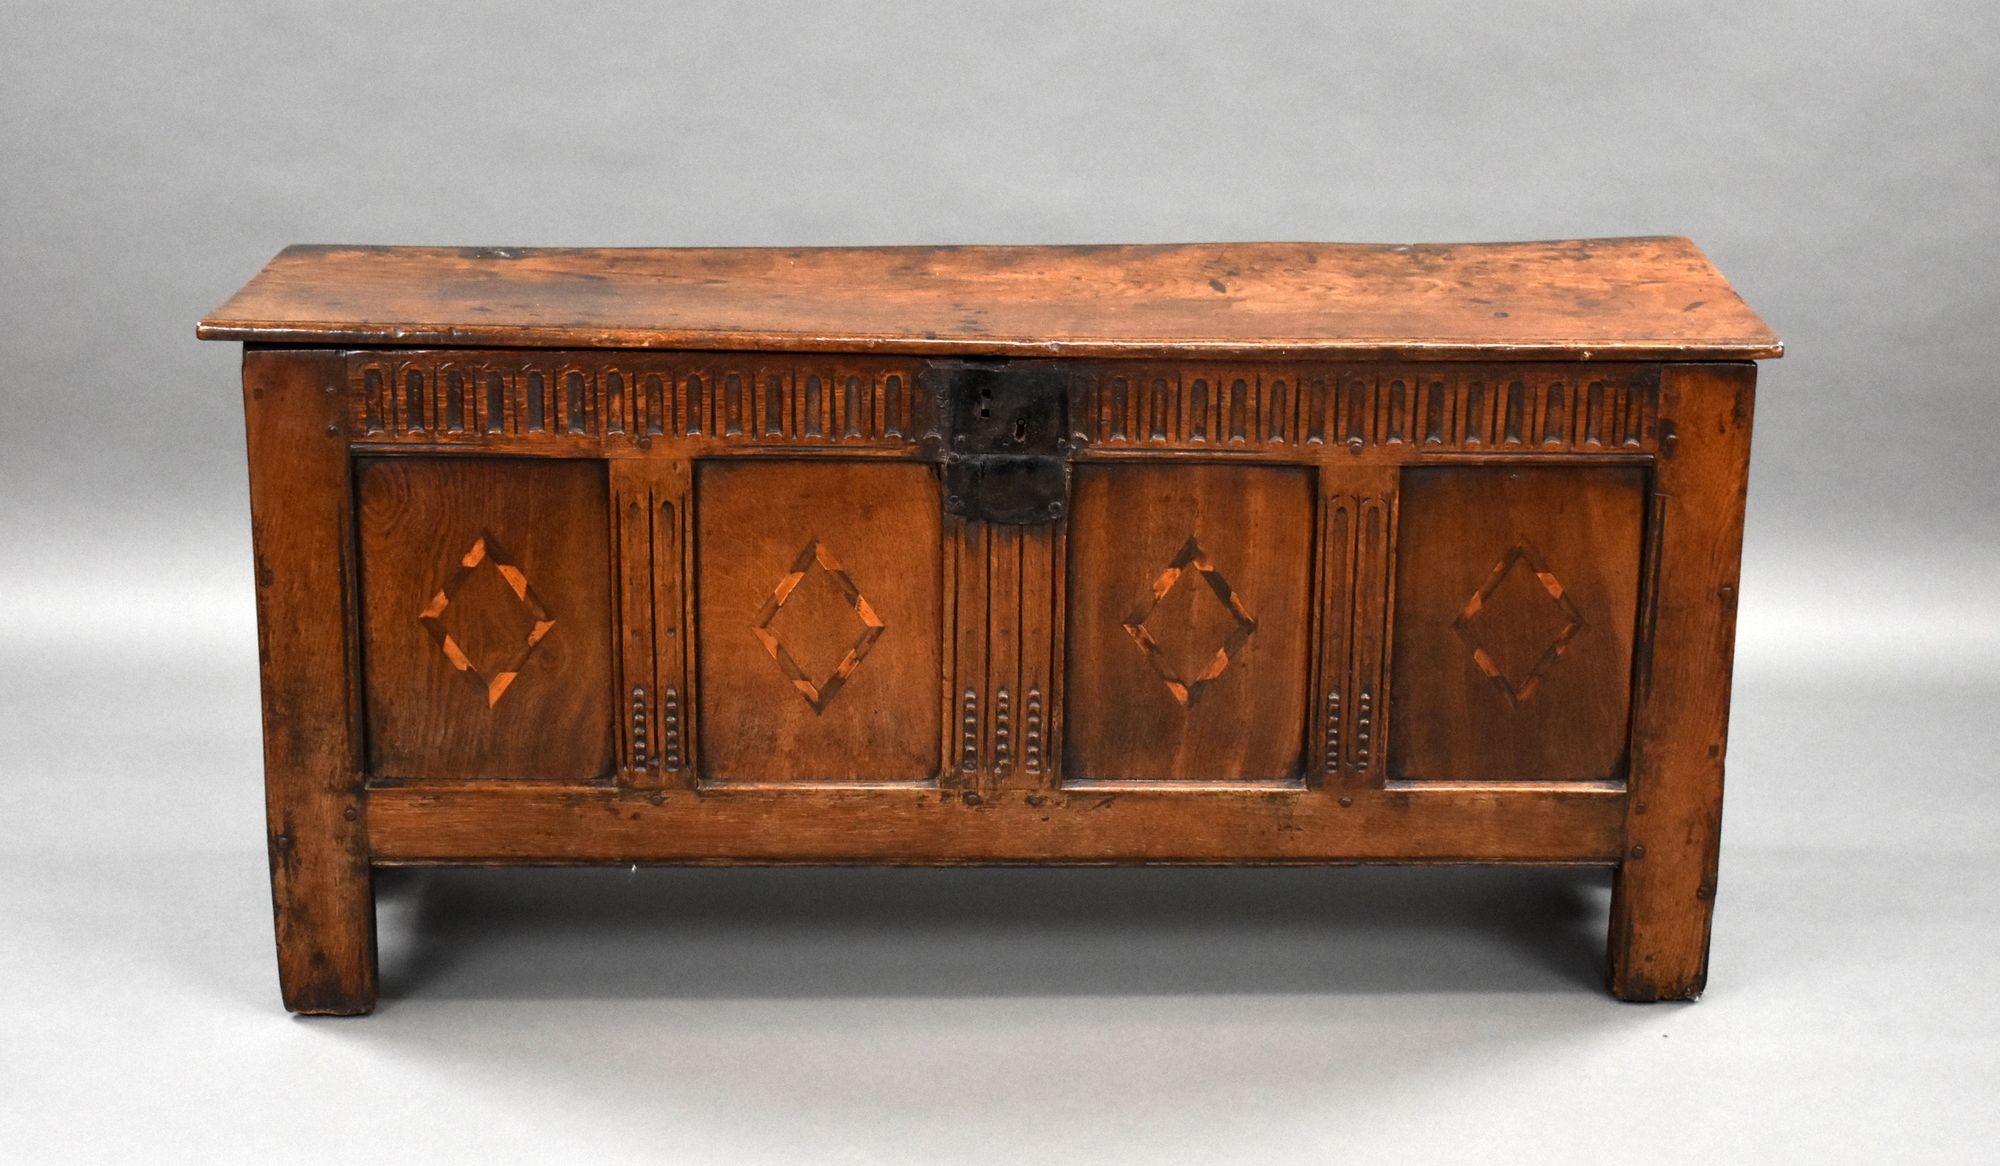 For sale is a good quality 17th century oak coffer, having a hinged lid above four inlaid panels, raised on bracket feet. The coffer remains in good condition for its age.

Width: 132cm Depth: 38cm Height: 63cm